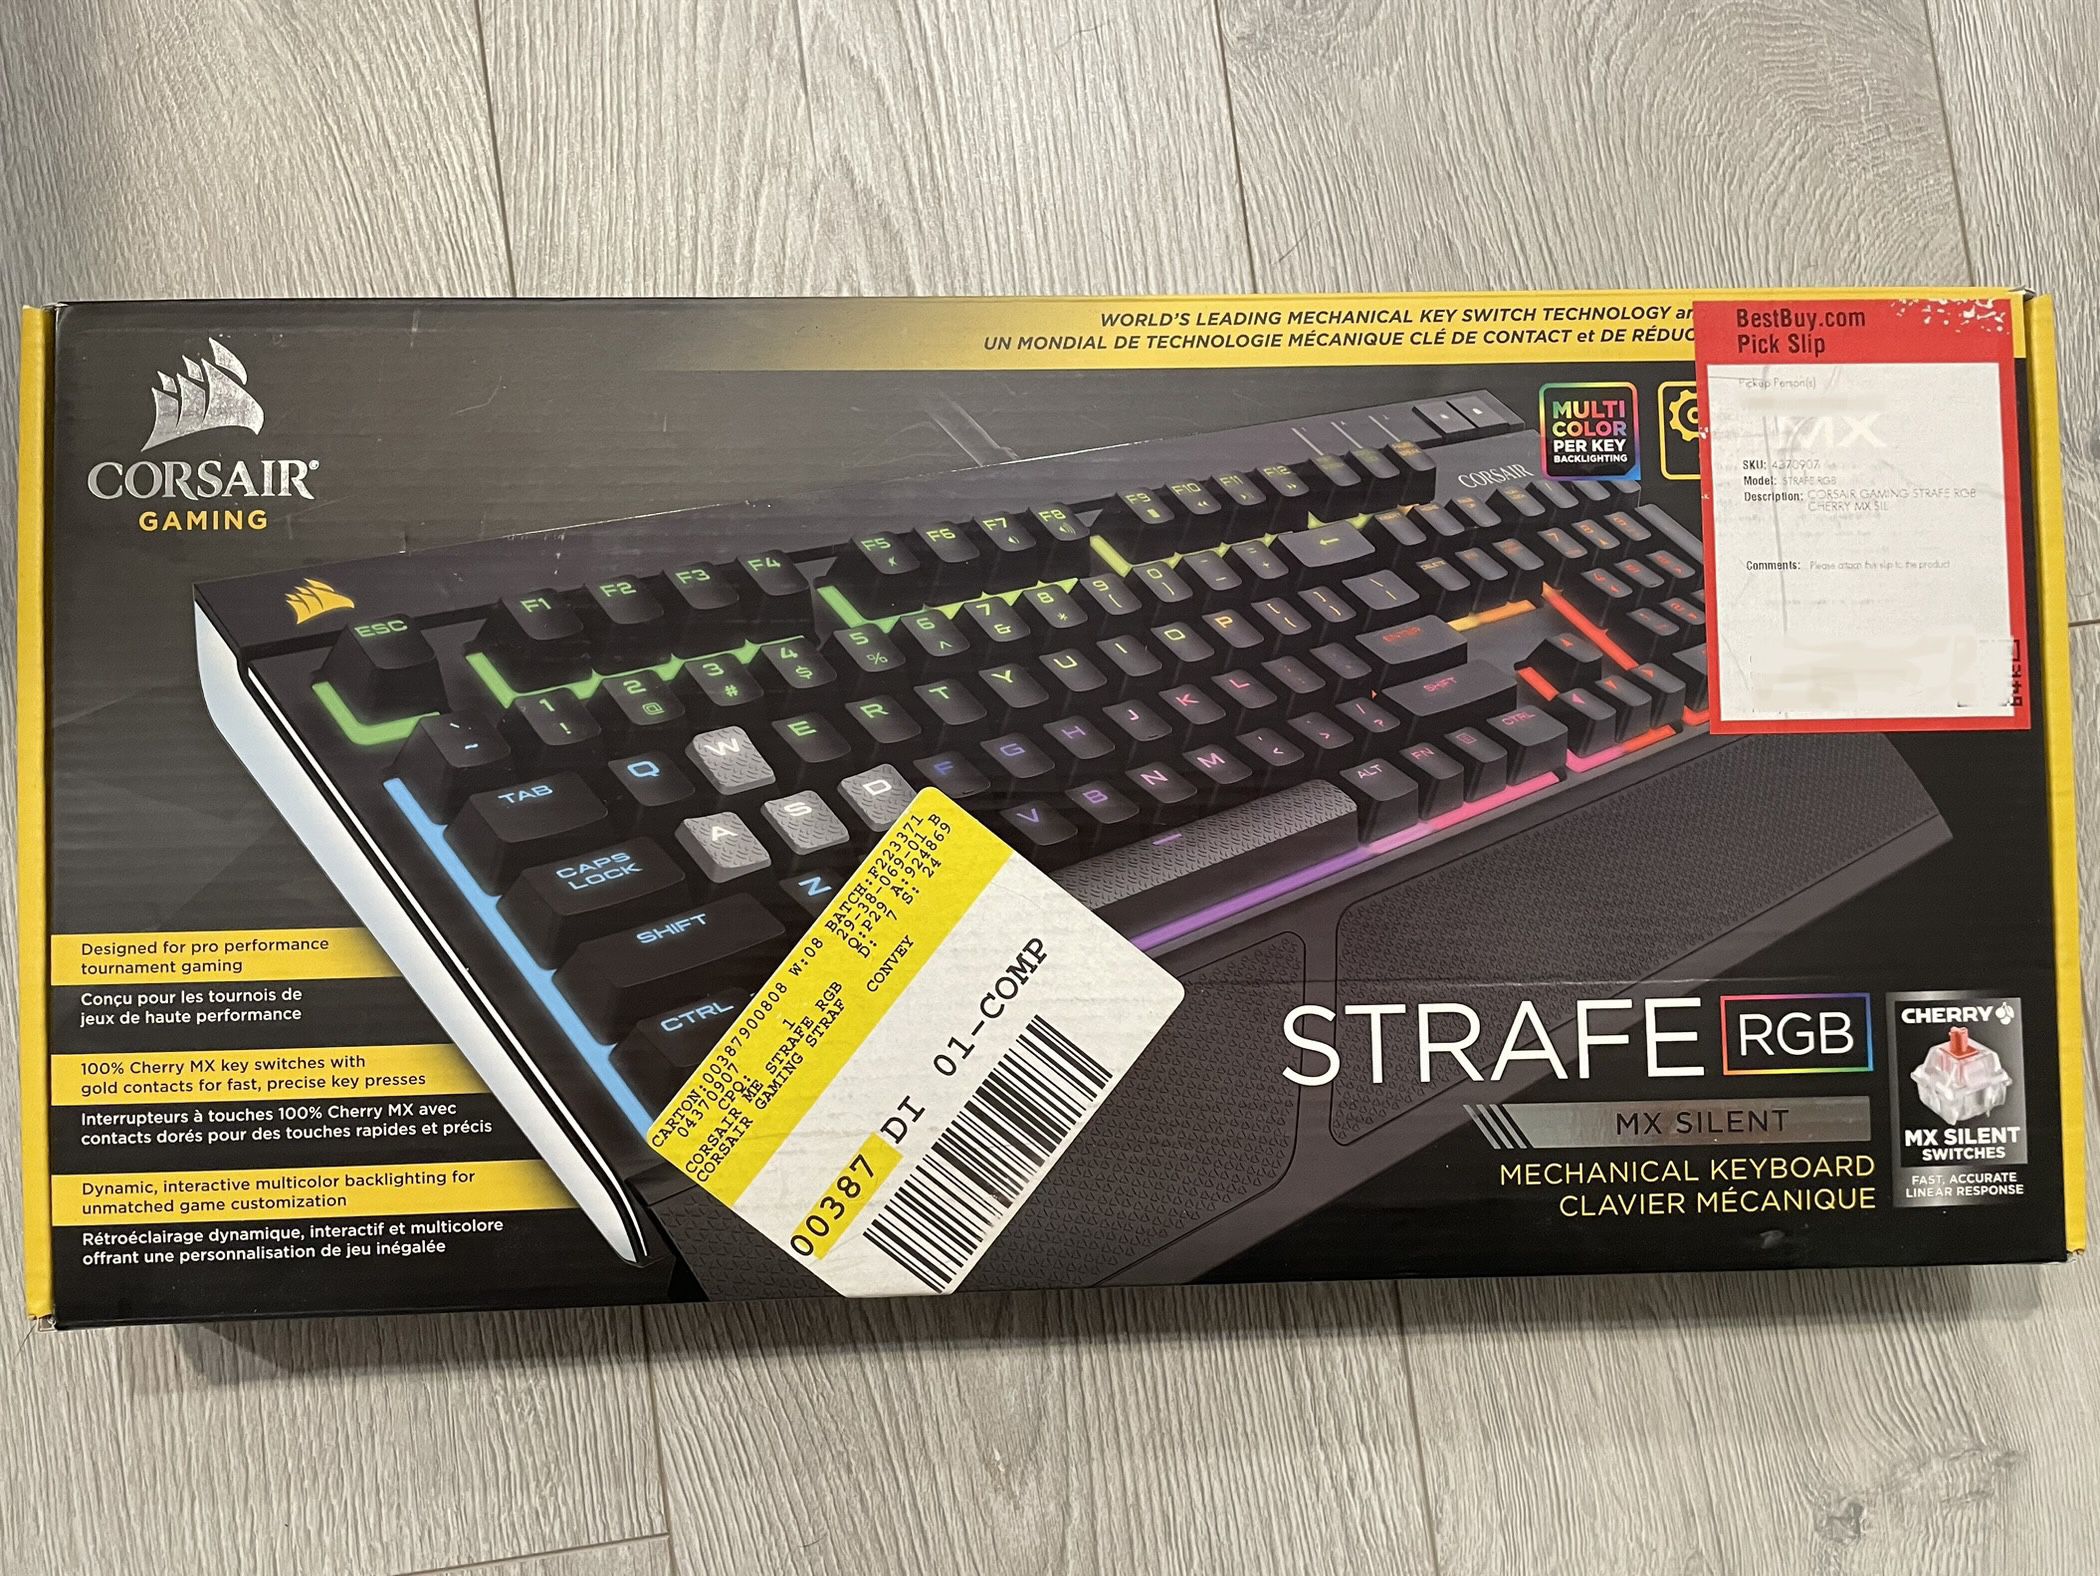 CORSAIR STRAFE RGB Mechanical Gaming Keyboard for in Chicago, IL - OfferUp